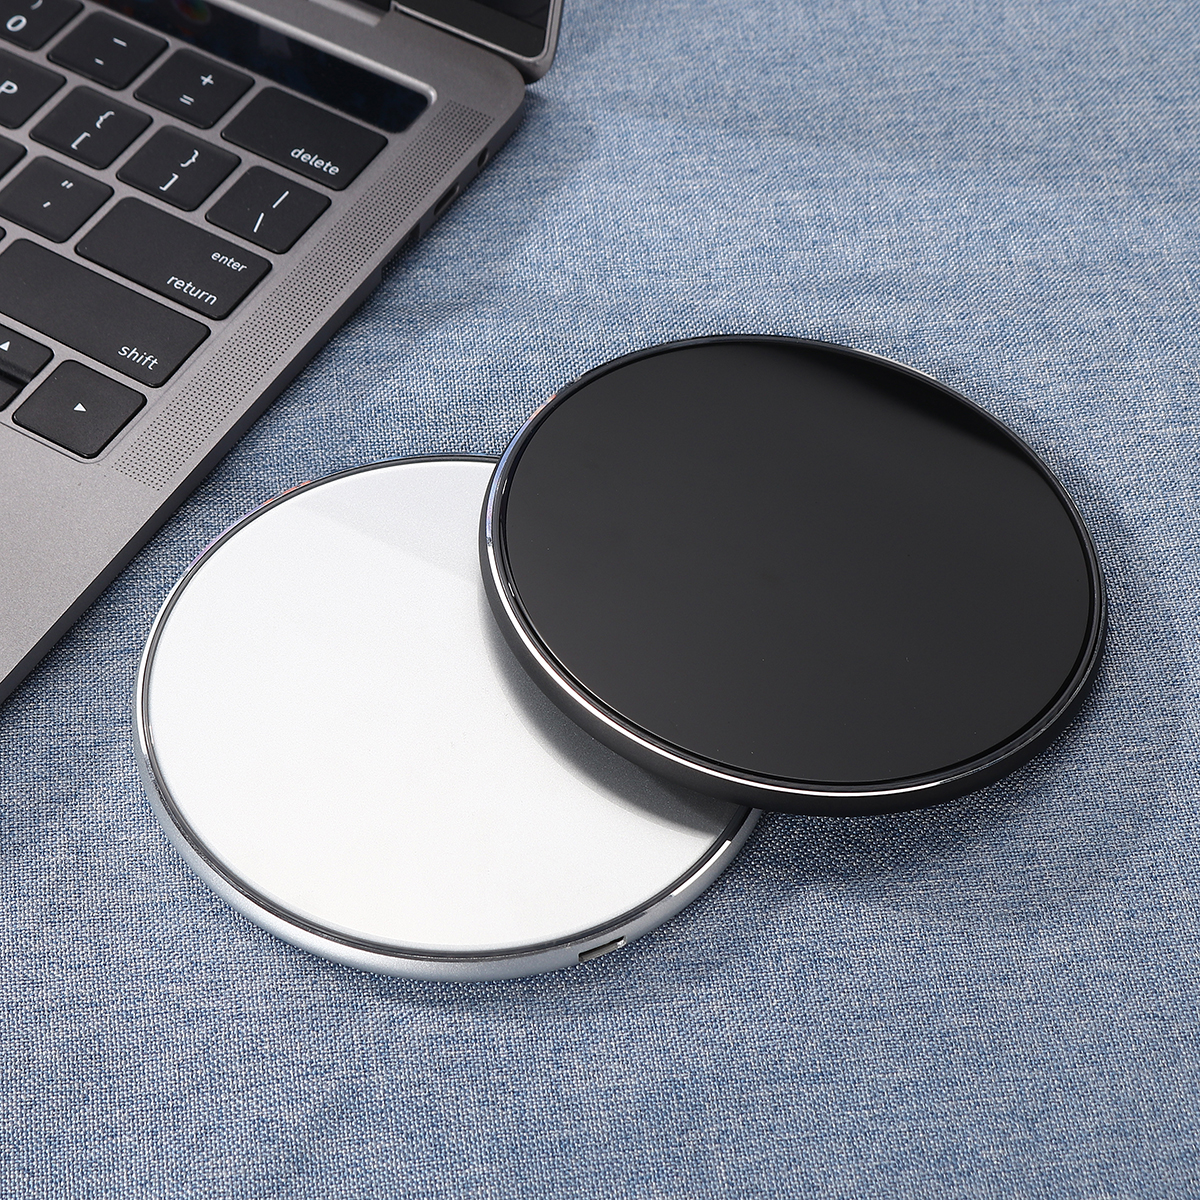 Bakeey-20W-Wireless-Charger-for-iPhone-Xs-Max-X-8-Plus-for-Samsung-Note-9-Note-8-S10-Plus-1614887-10